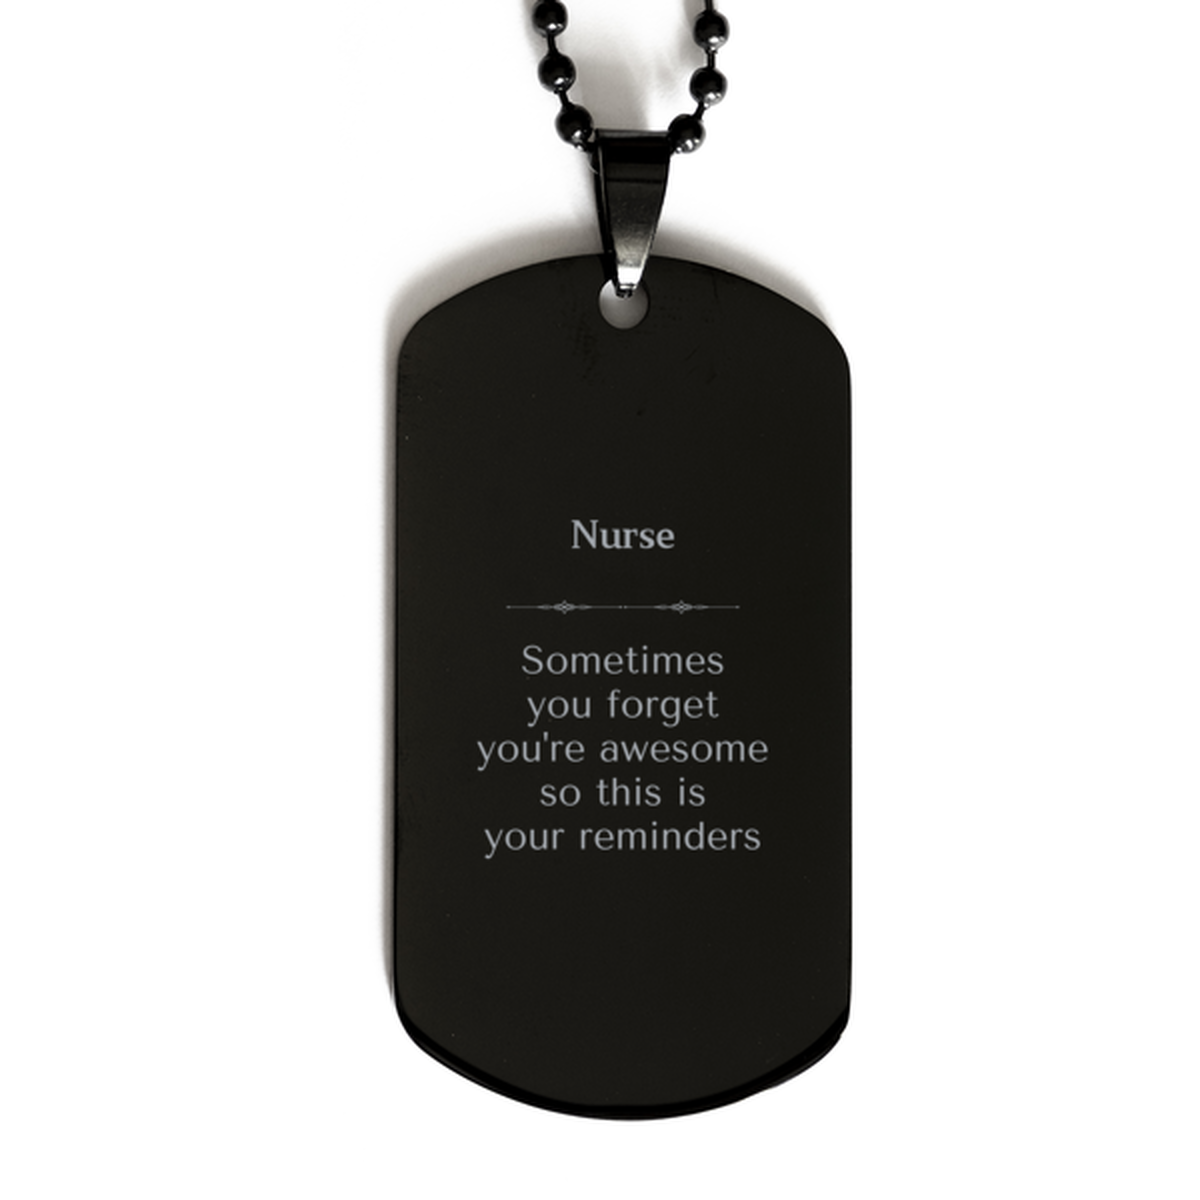 Sentimental Nurse Black Dog Tag, Nurse Sometimes you forget you're awesome so this is your reminders, Graduation Christmas Birthday Gifts for Nurse, Men, Women, Coworkers